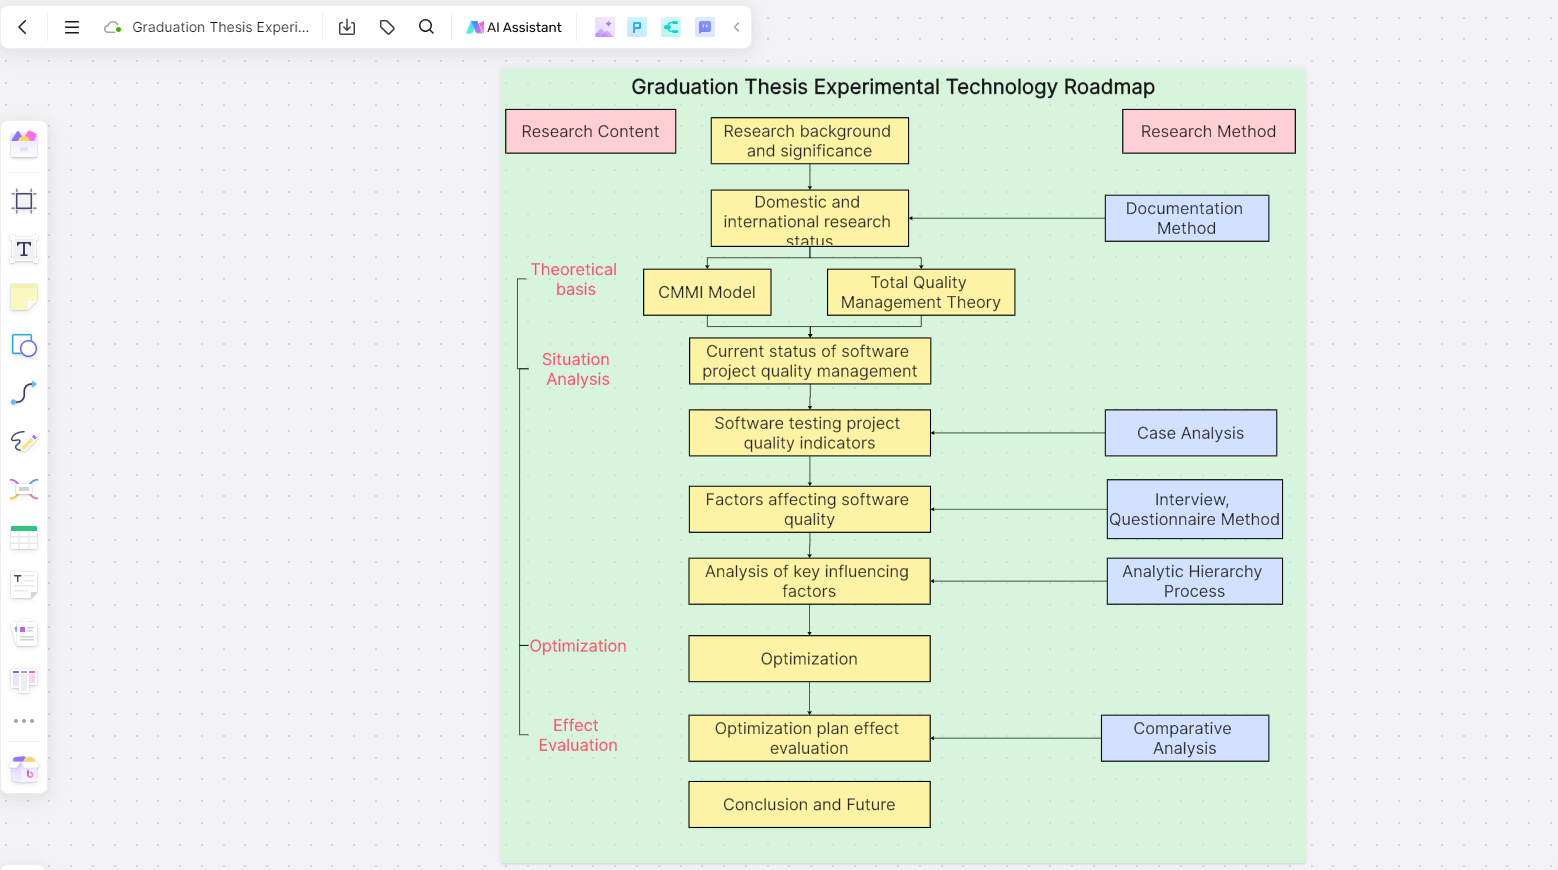 How to Draw Technology Roadmap? Free Roadmap Drawing tools